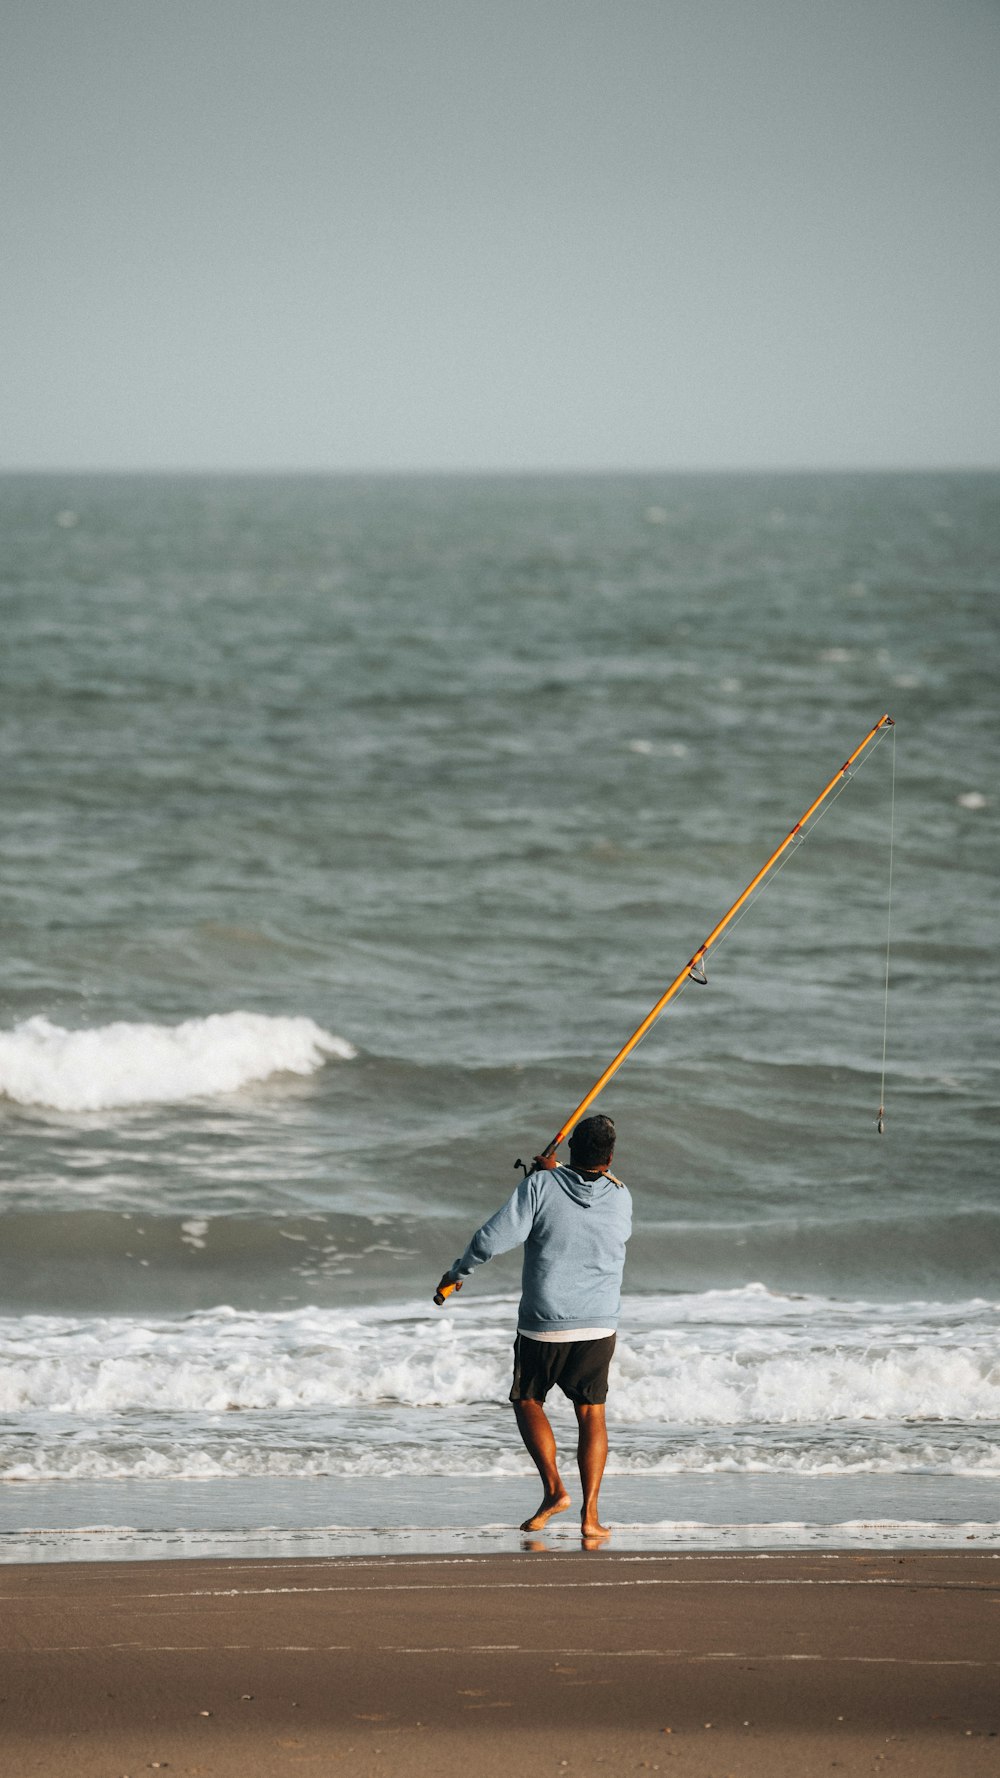 A man on the beach flying a kite photo – Free Fishing Image on Unsplash